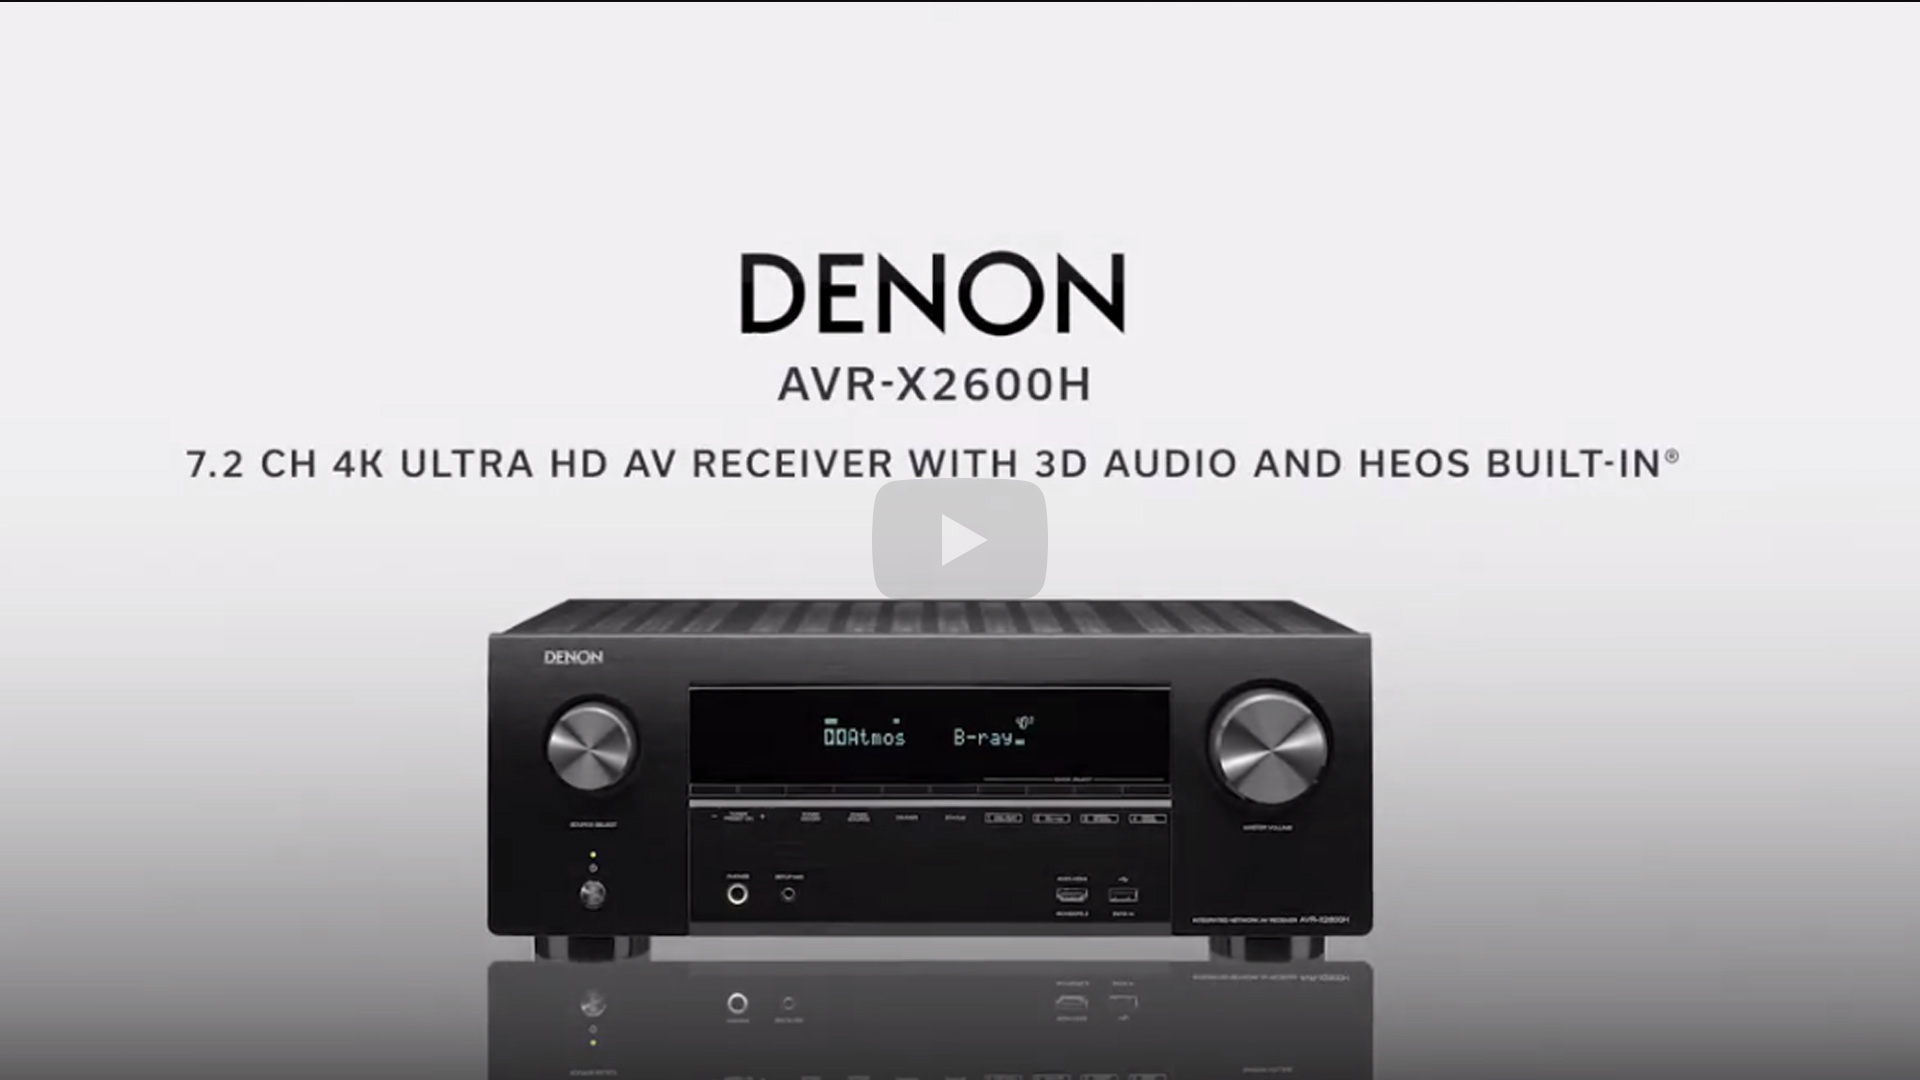 8 HDMI Inputs 7.2 Channel 95W Each 2 Outputs with eARC Dual Subwoofer Outputs AirPlay 2 New Dolby Atmos Height Virtualization Denon AVR-X2600H 4K UHD AV Receiver Alexa & HEOS 2019 Model 